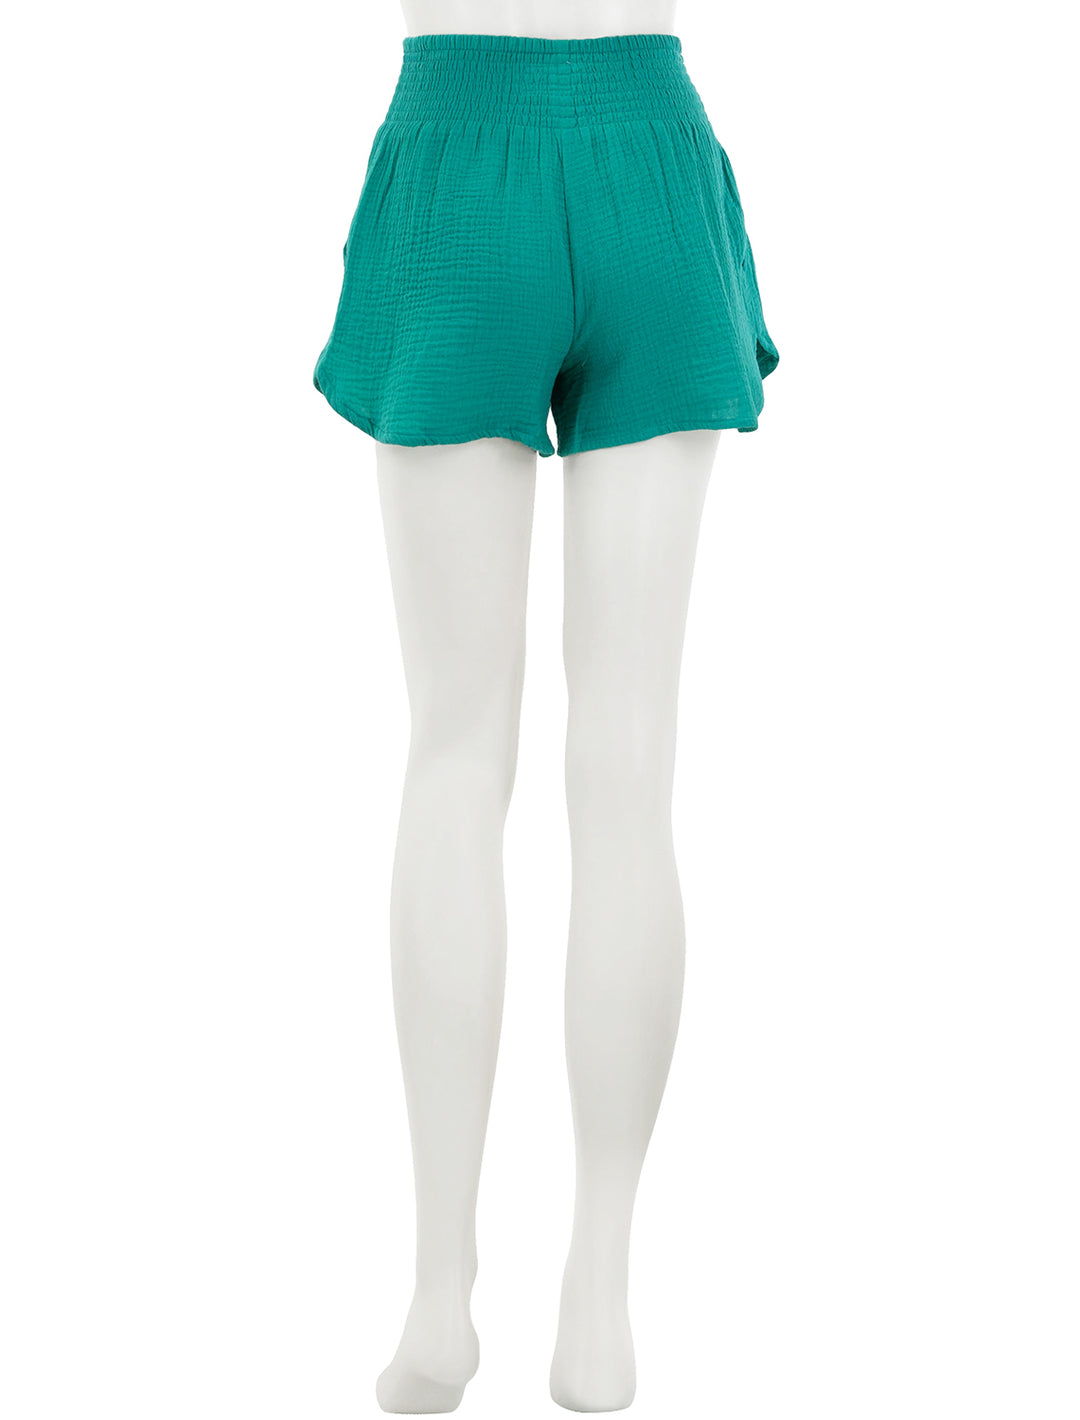 Back view of Marine Layer's cali double cloth short in spruce.